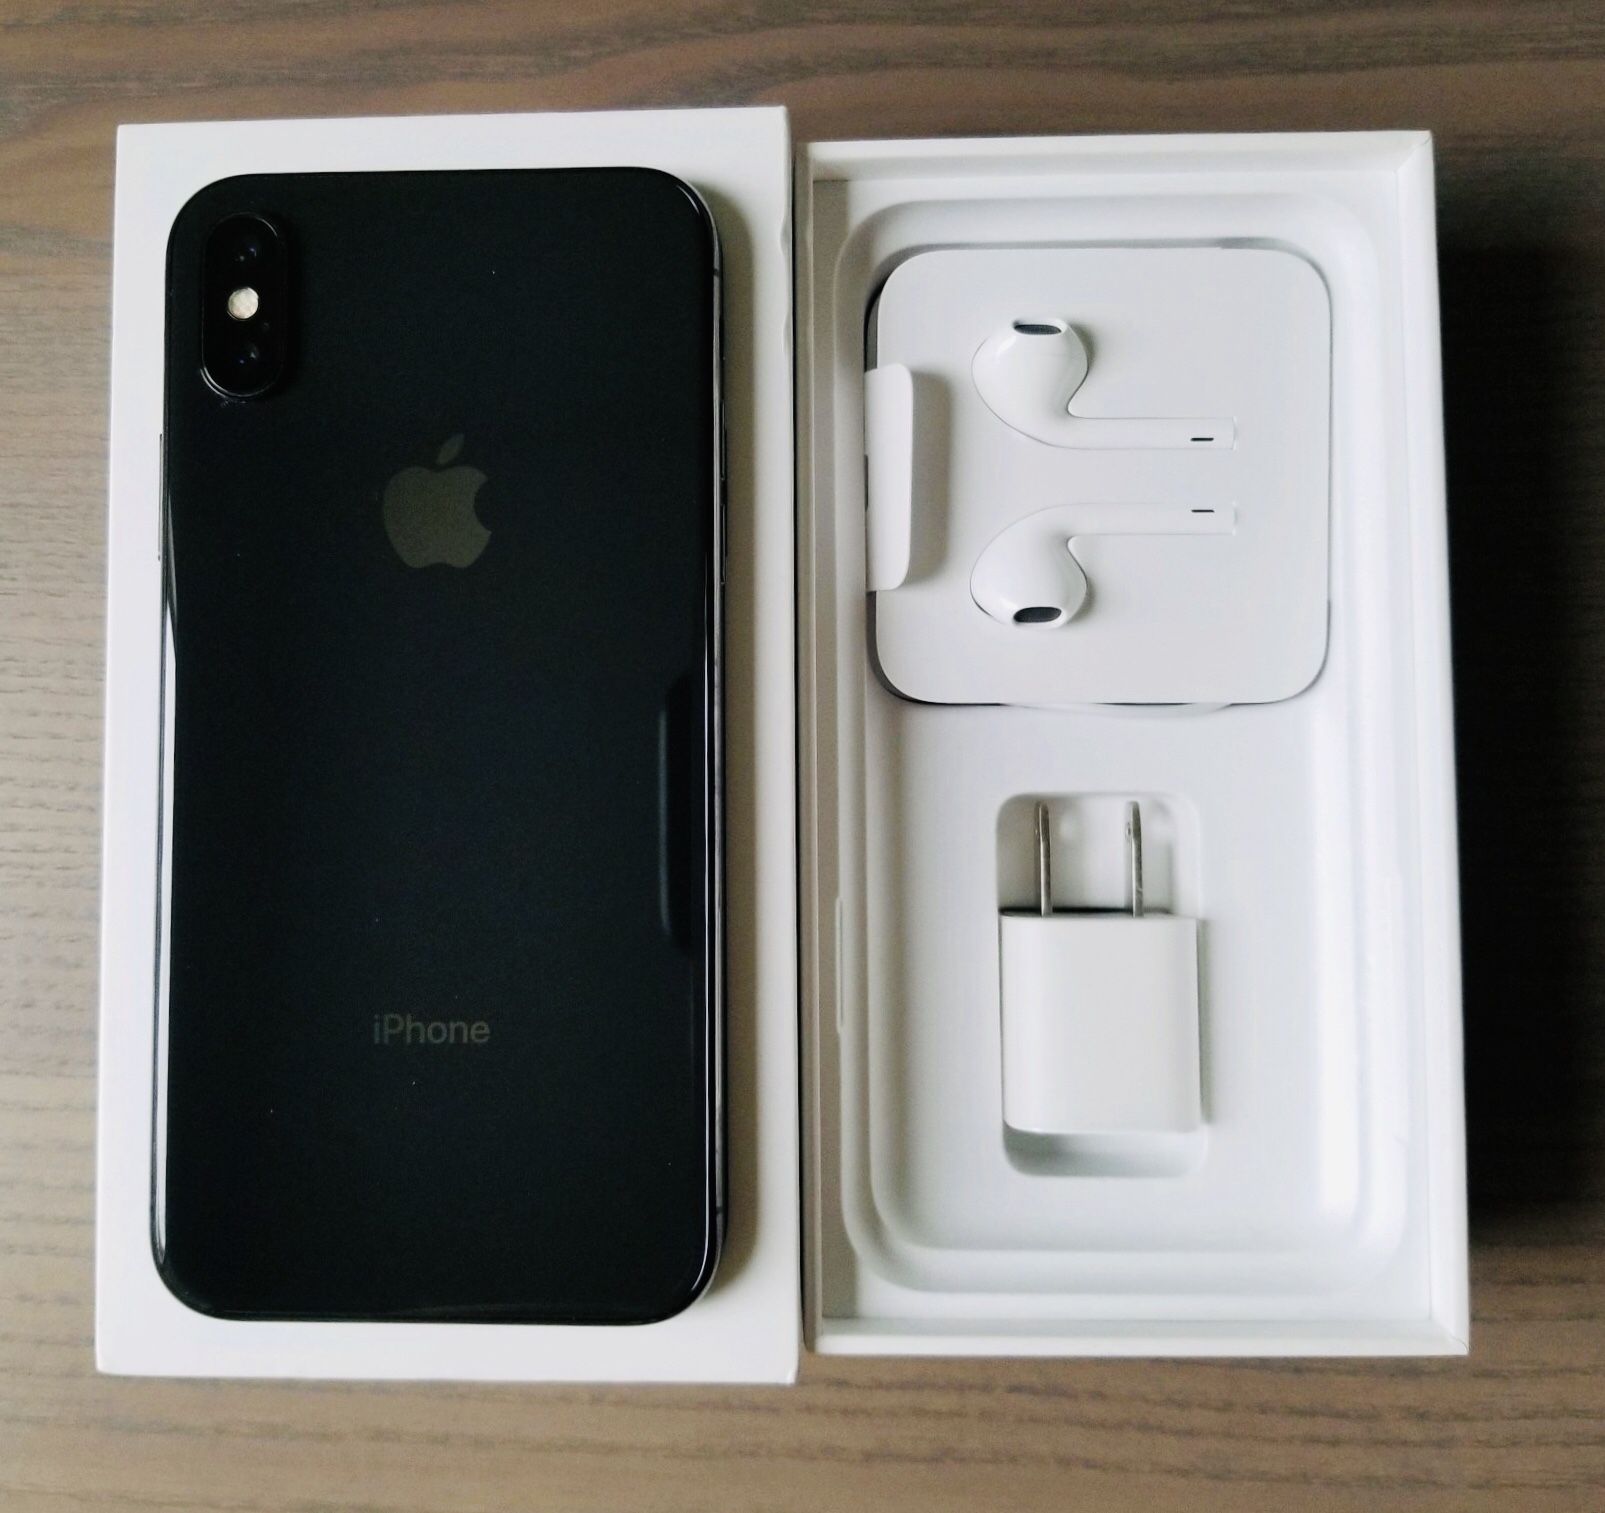 iPhone X - Space Gray